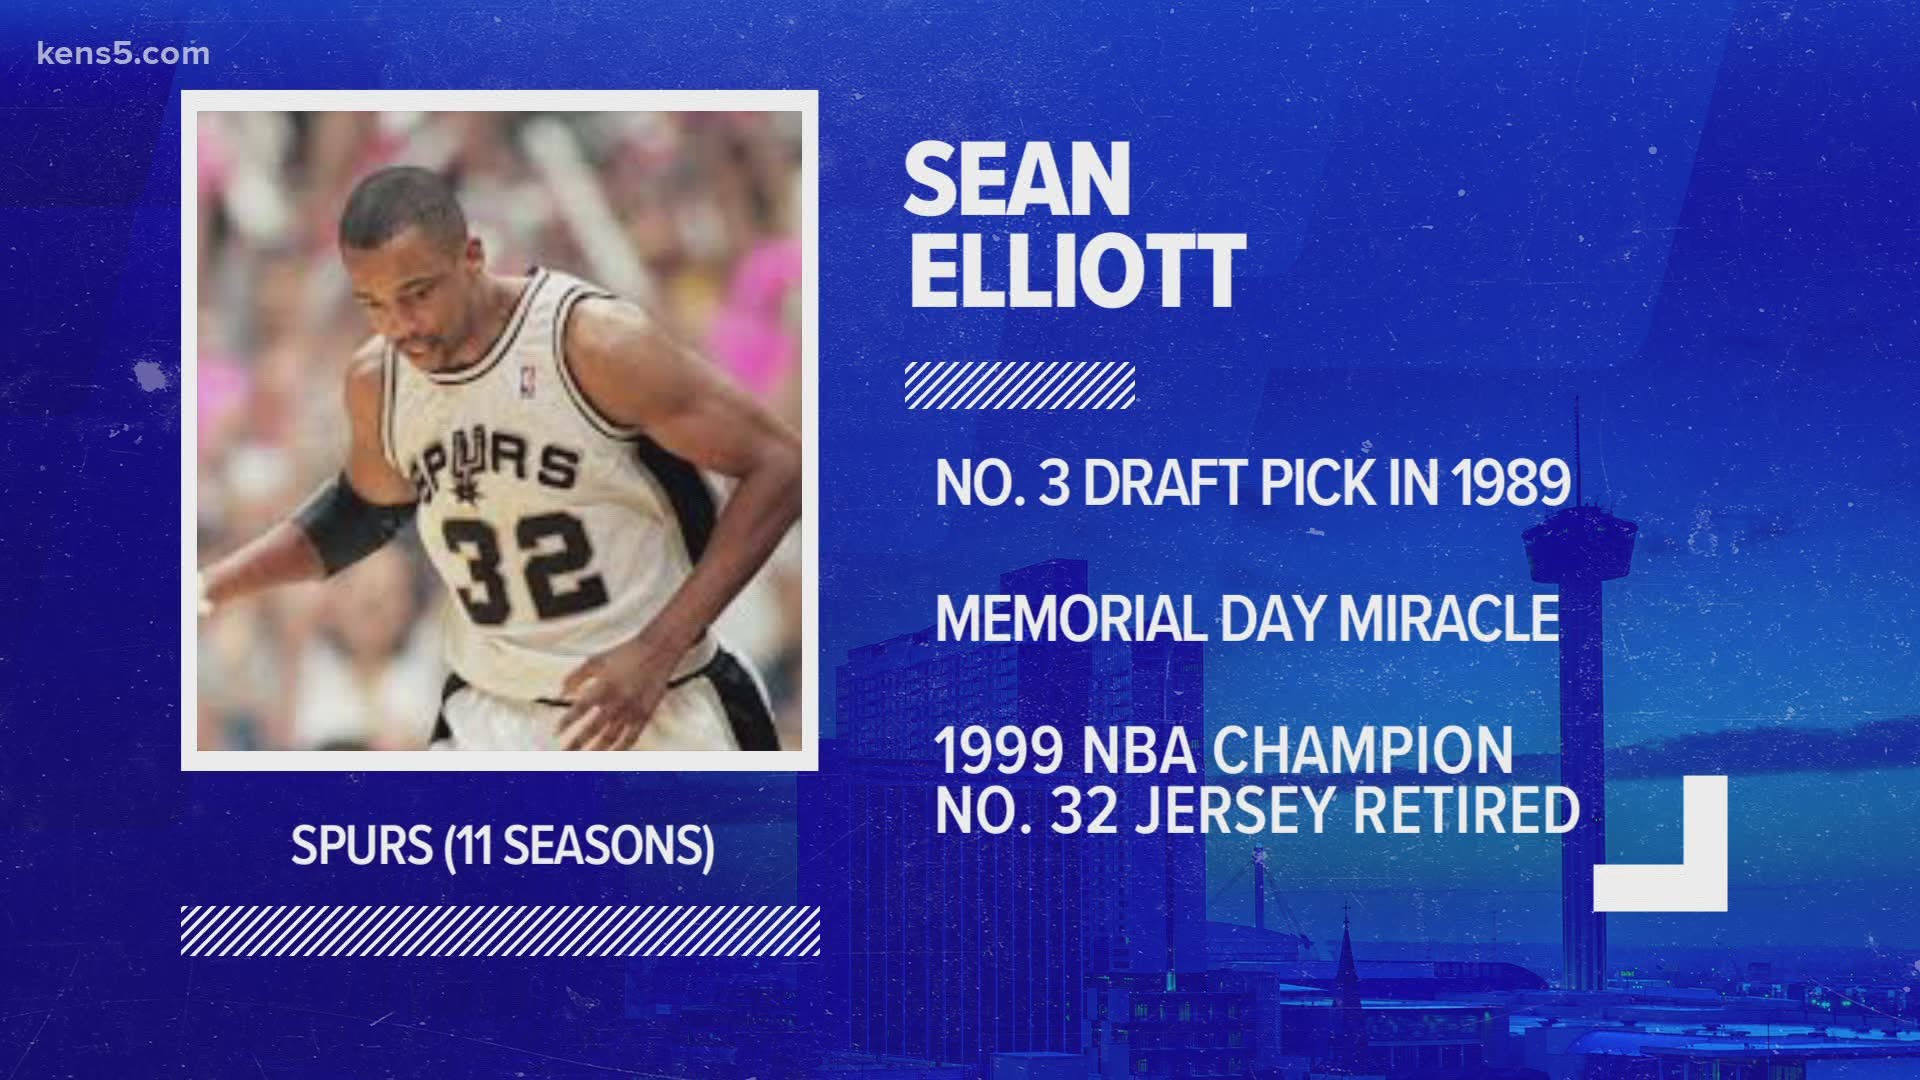 Elliott was selected by Spurs in the 1989 Draft before going on to help the Silver and Black win an NBA title in 1999.